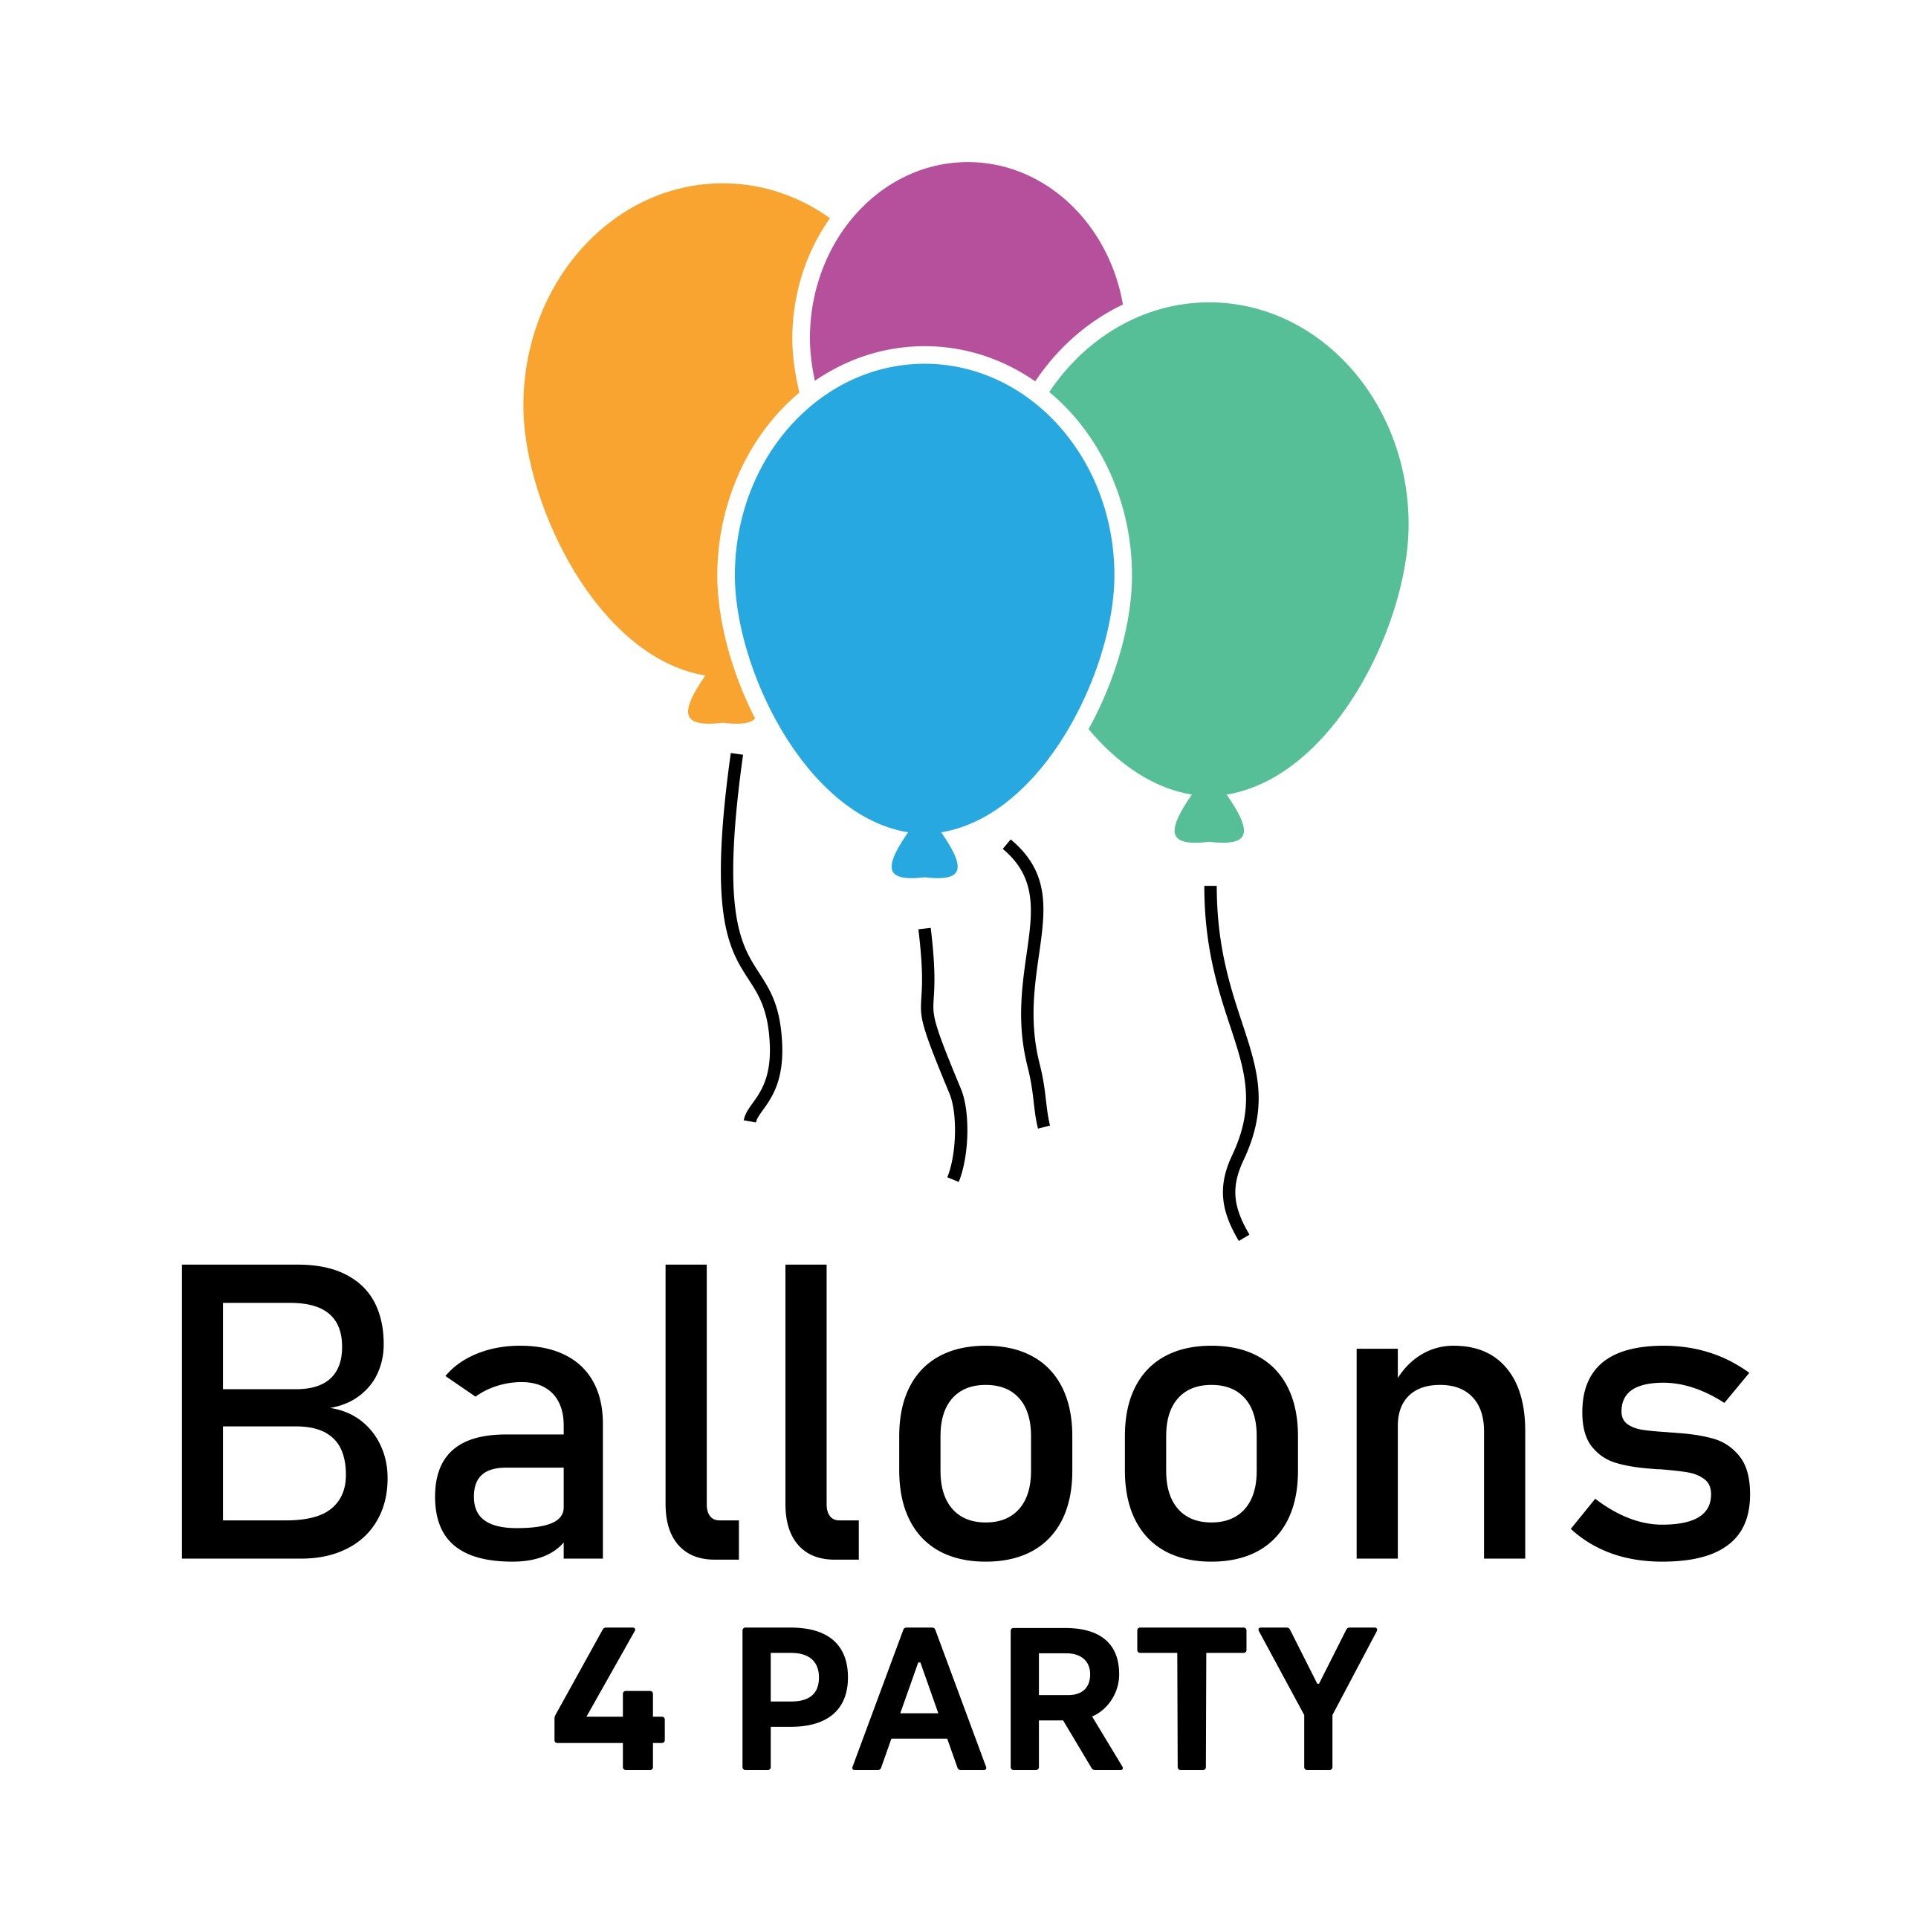 Balloons4party